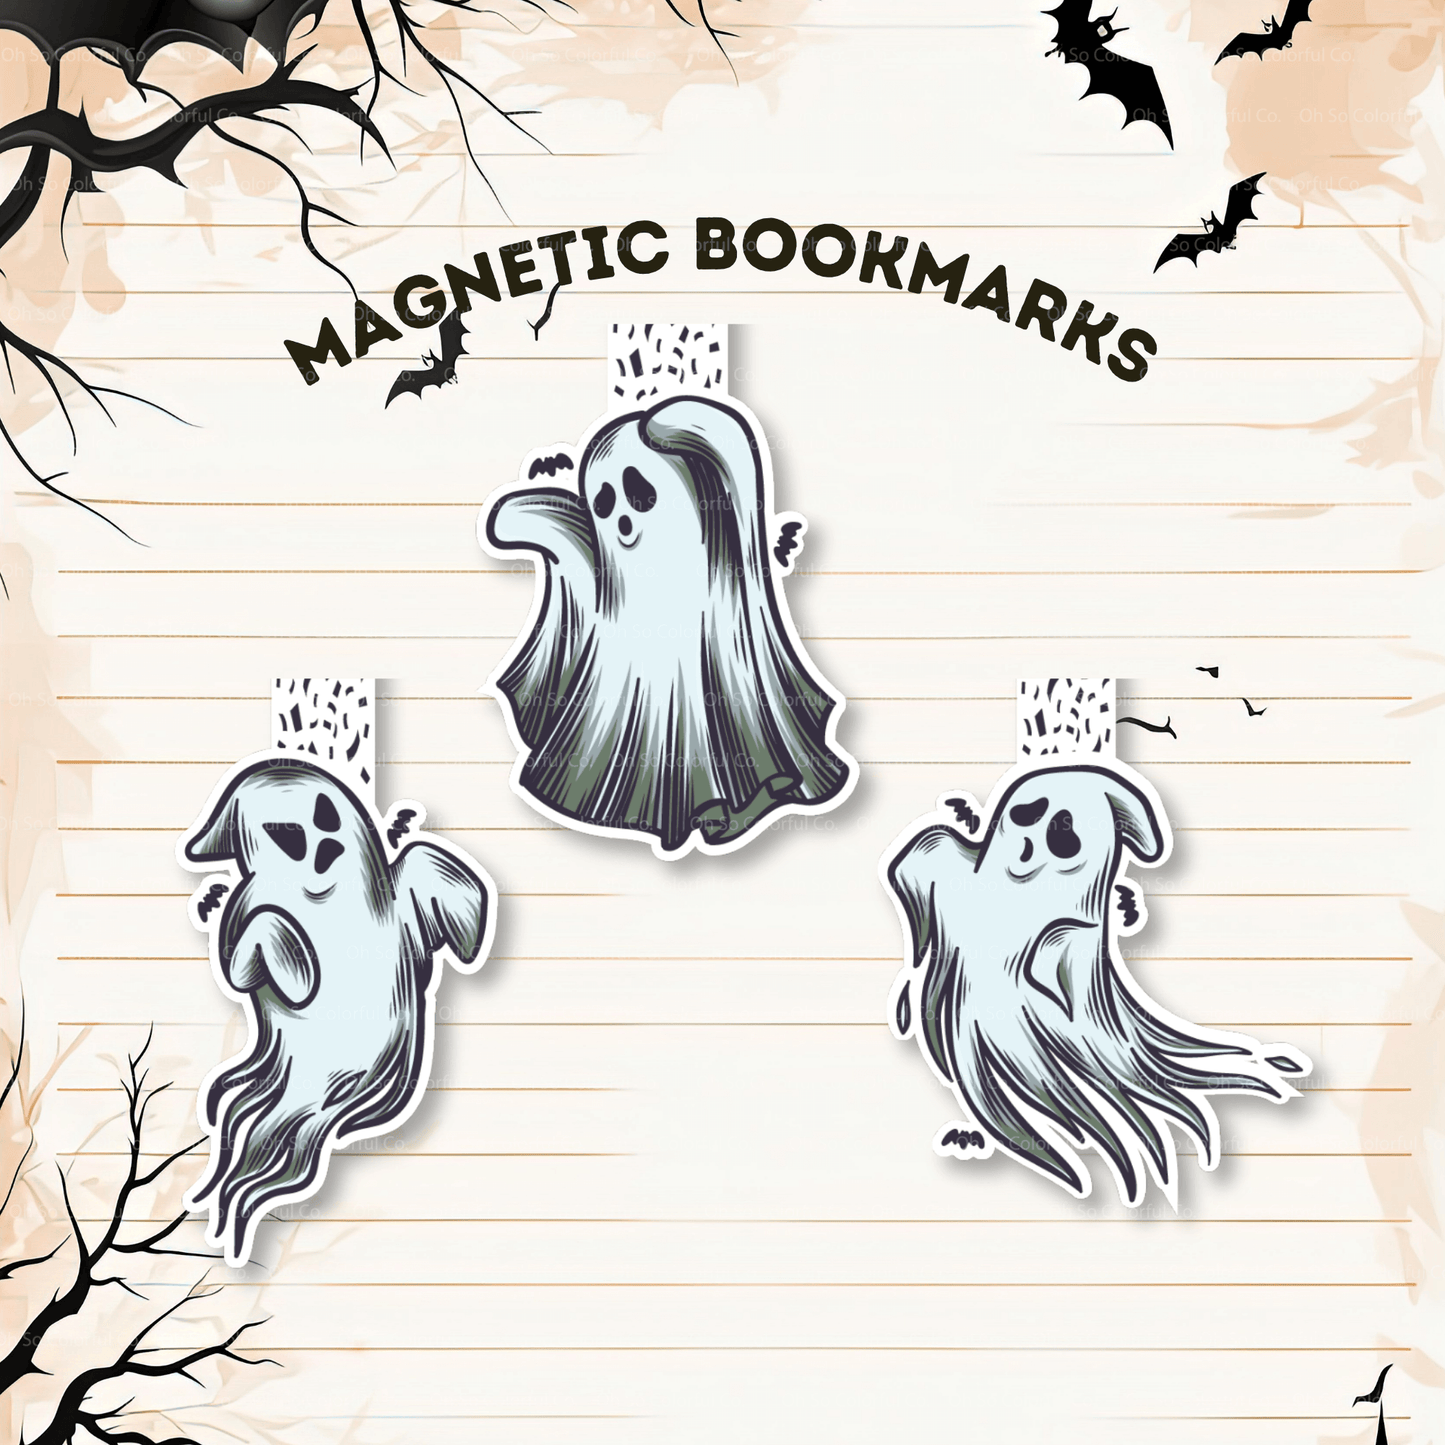 halloween ghost bookmark, book lover bookmarks, magnetic bookmark, gift for readers, bookstagram, booktok, bookish bookmark, bookmark set, gift for bookworms, bookish gift, book accessories, halloween bookish gift, handmade bookmark, book accessories 